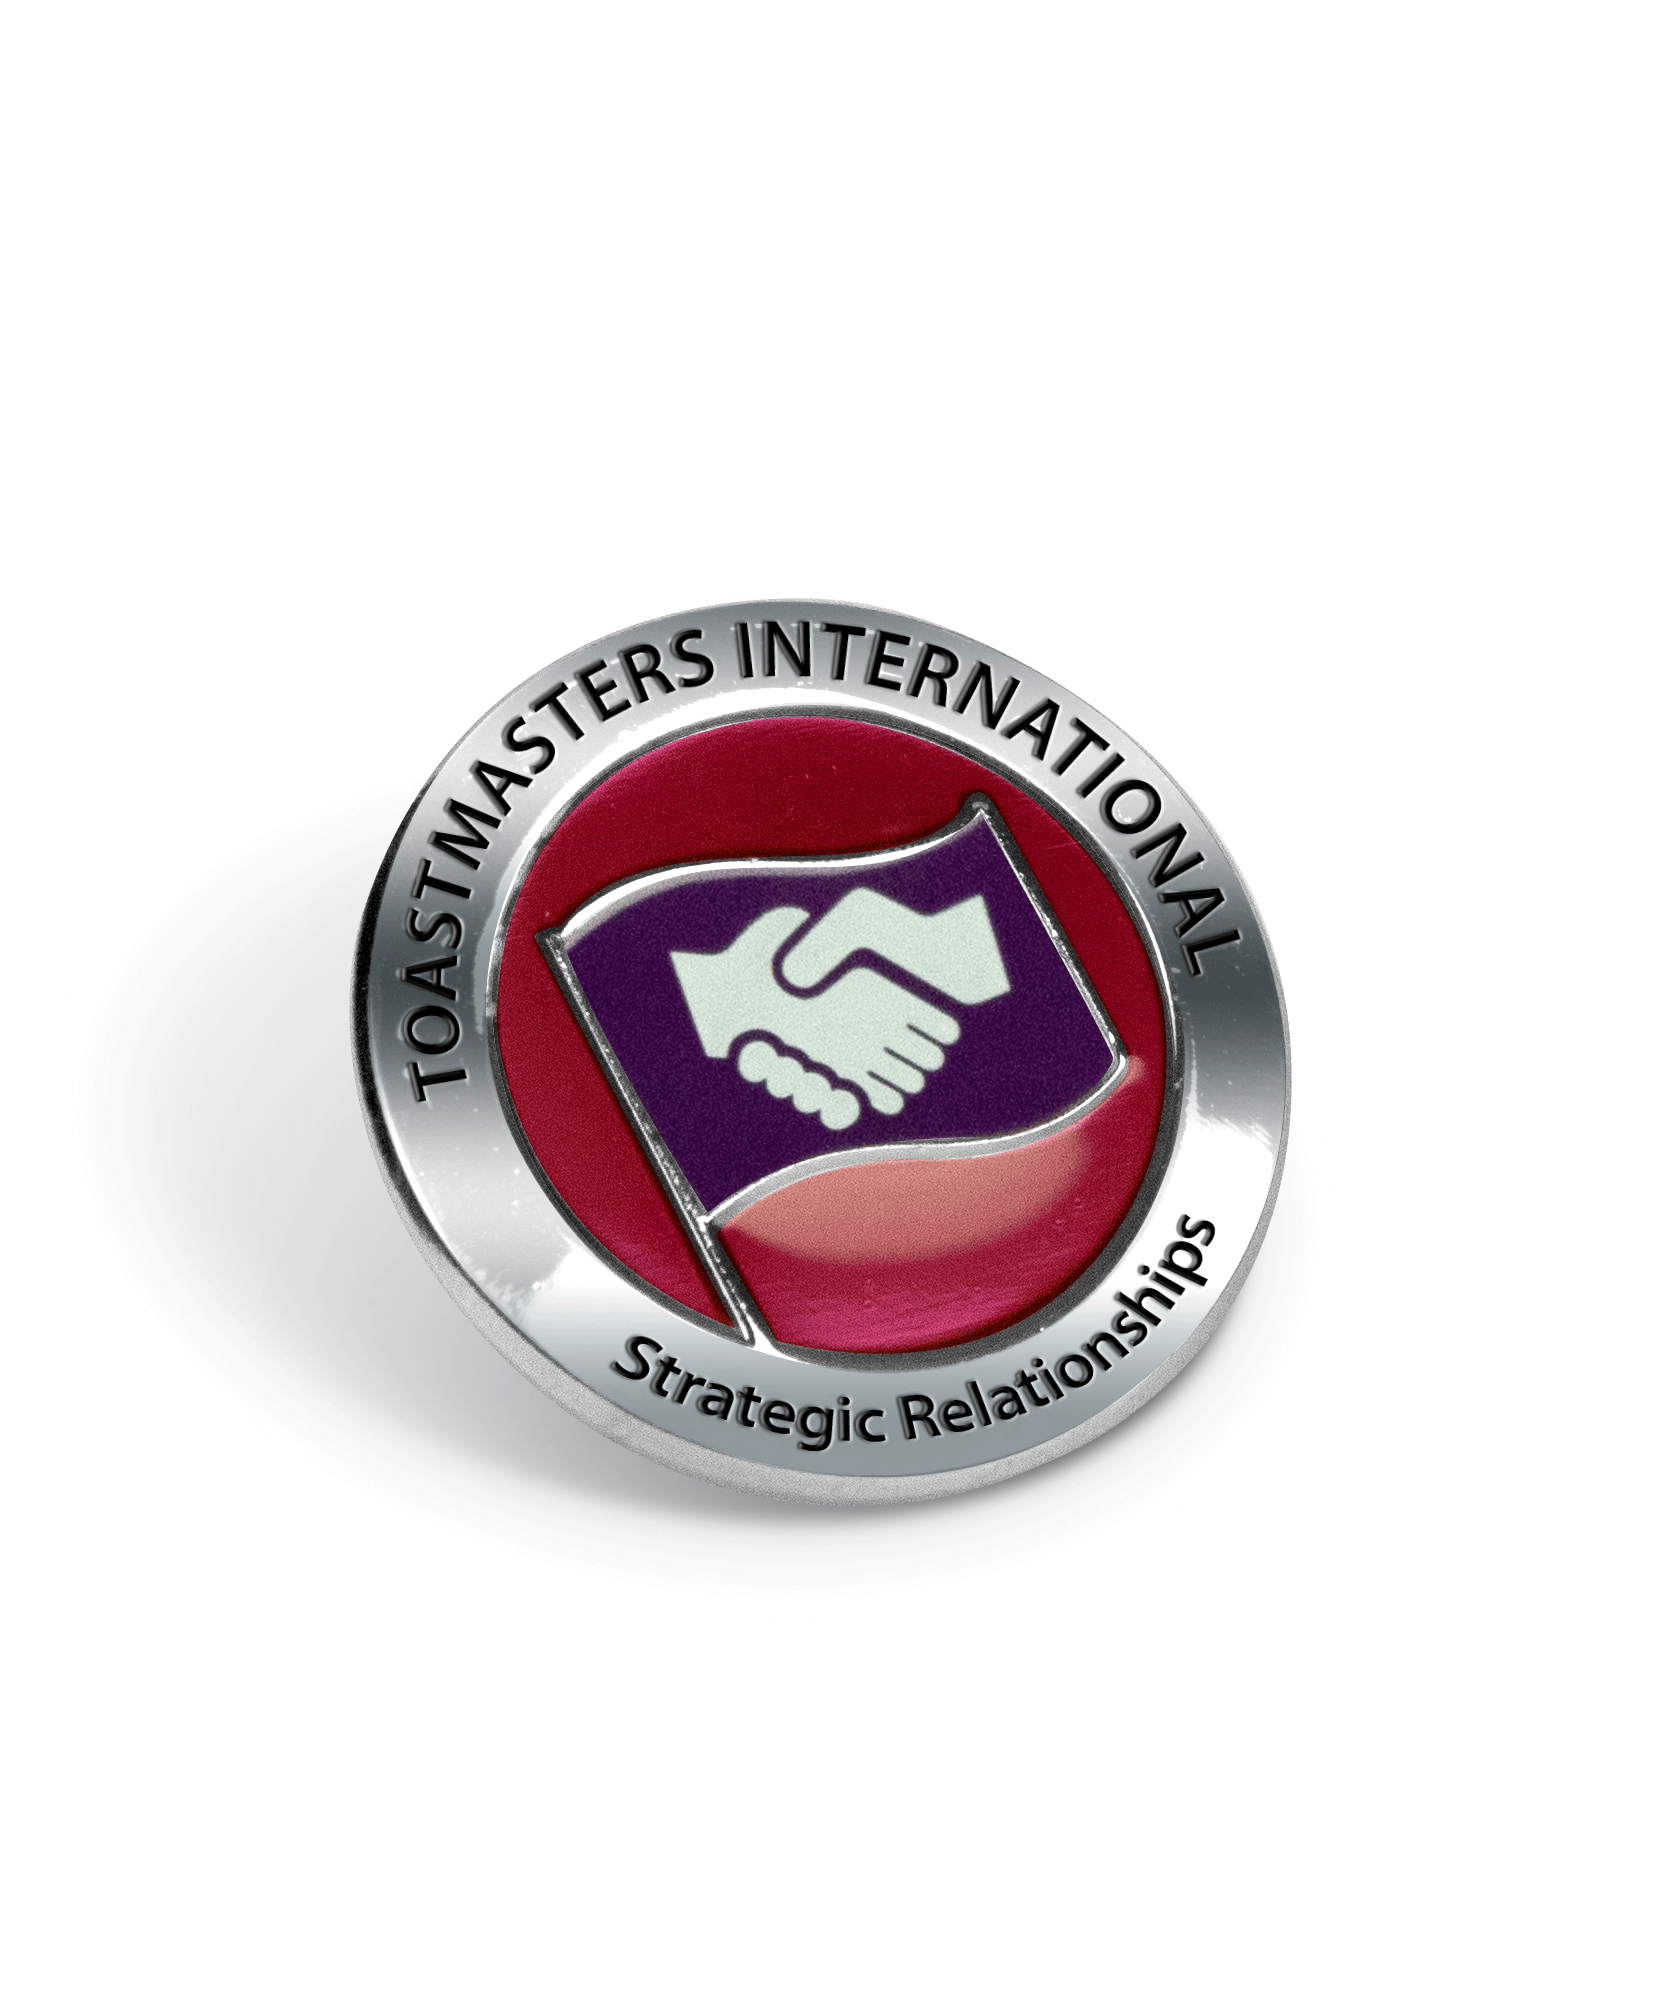 Polished silver pin with Toastmasters International and Strategic Relationships engraved on outside ring - features Strategic Relationship path logo in center